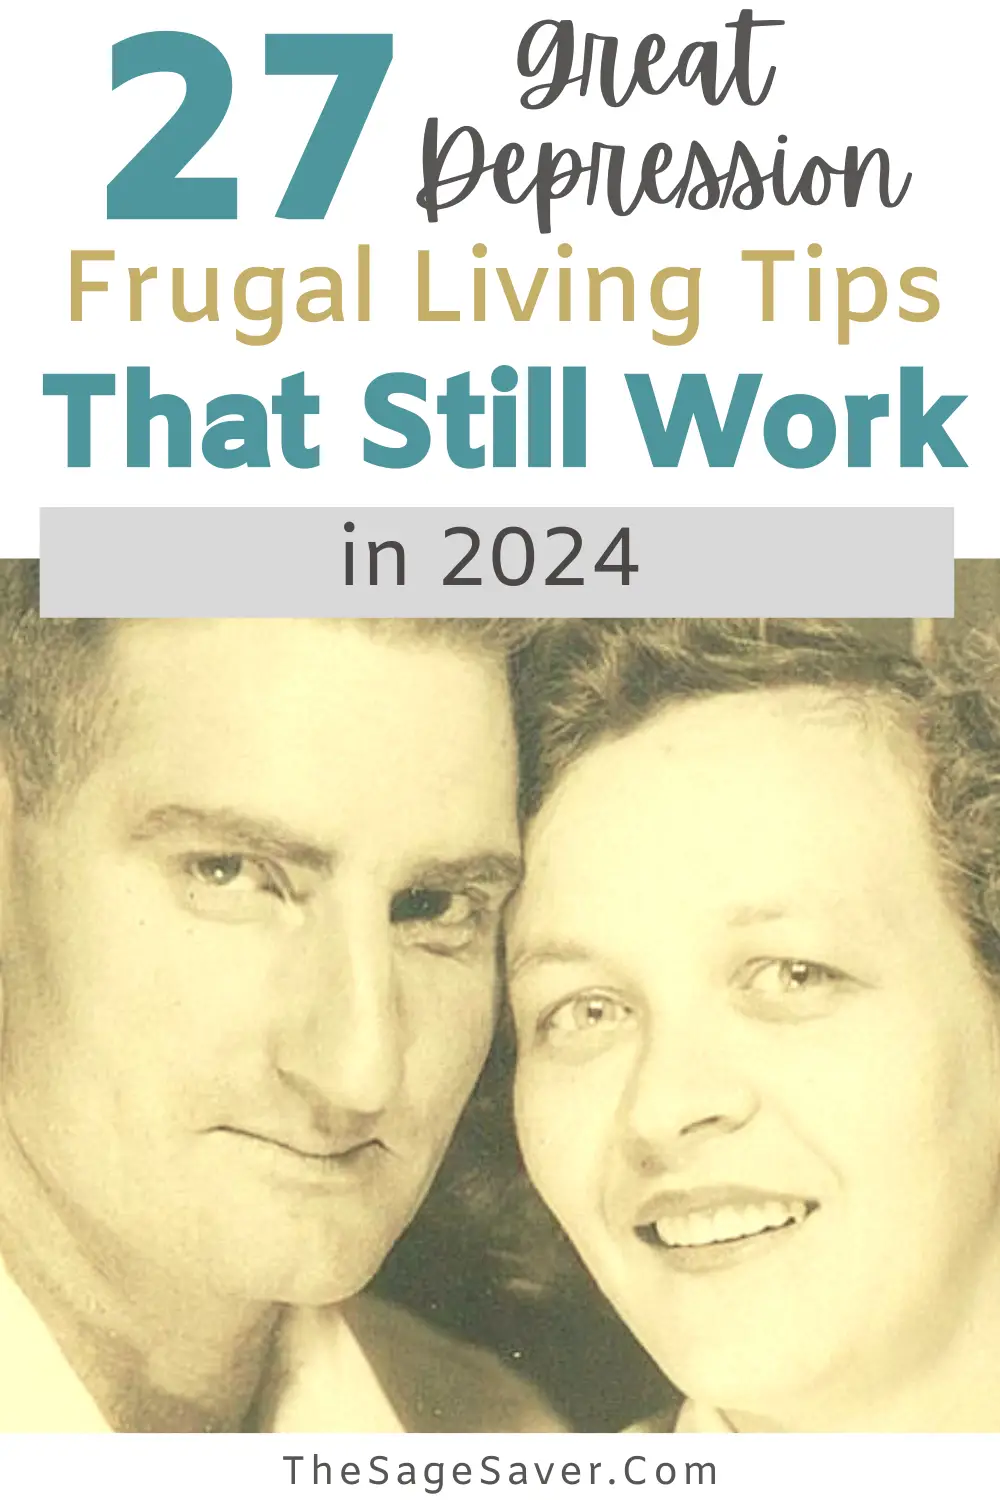 27 Great Depression Frugal Living Tips to Try in 2024